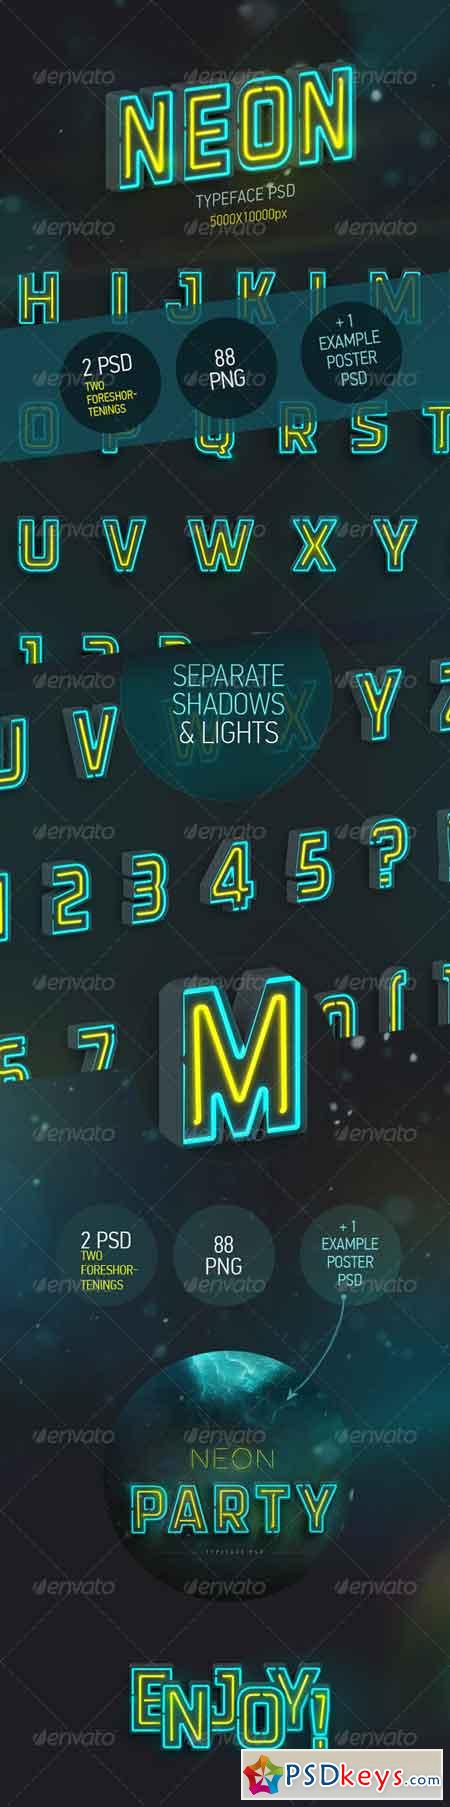 Neon Typeface (3 PSD, 88 PNG) 7789963